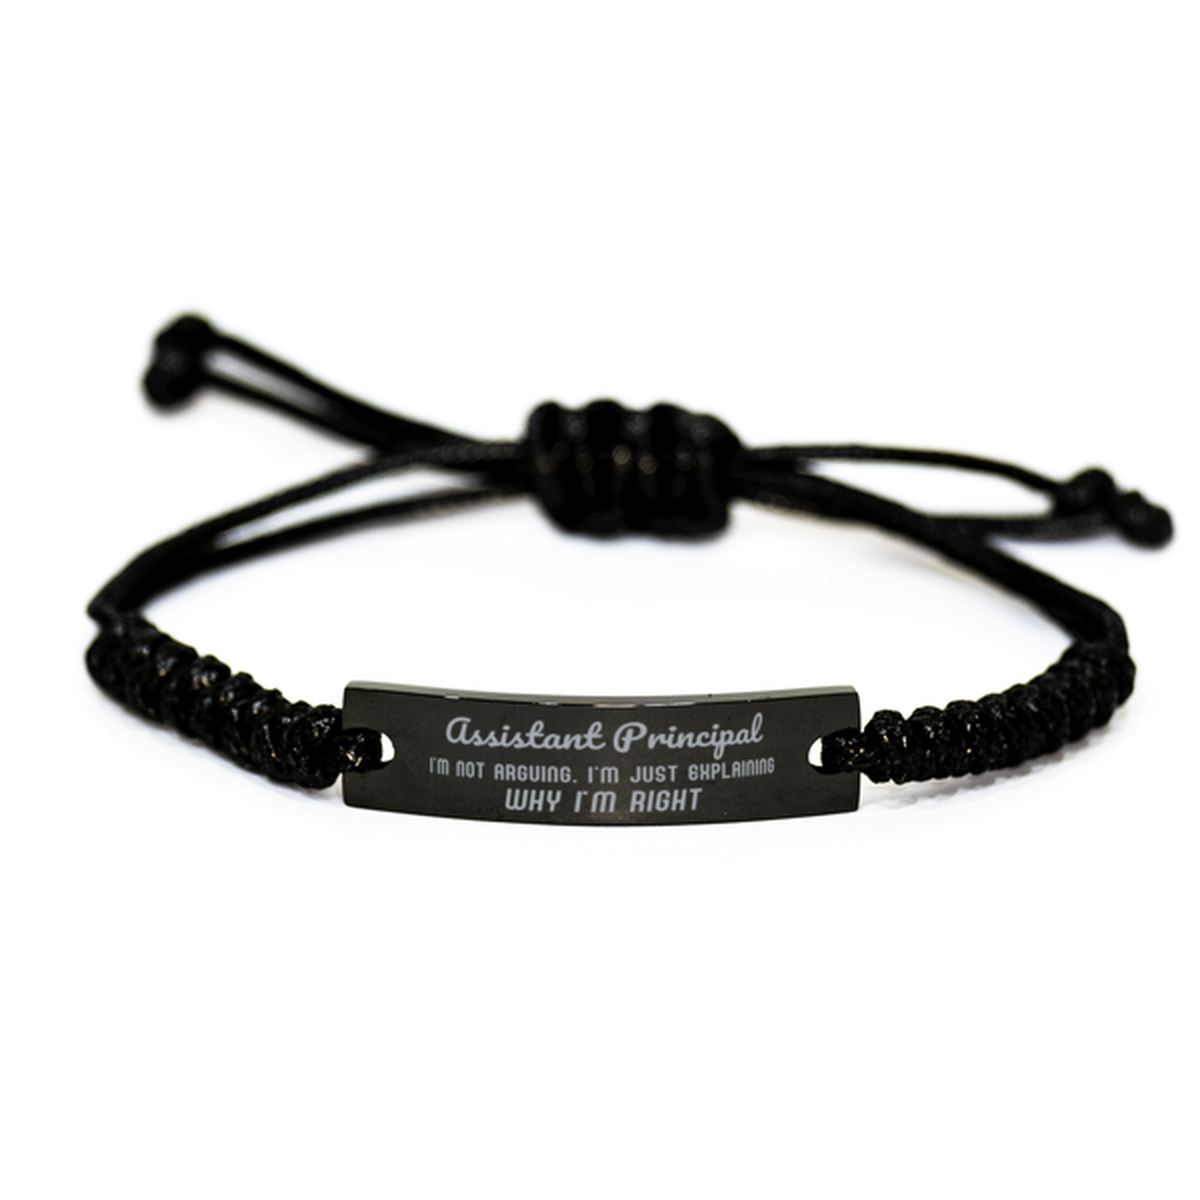 Assistant Principal I'm not Arguing. I'm Just Explaining Why I'm RIGHT Black Rope Bracelet, Funny Saying Quote Assistant Principal Gifts For Assistant Principal Graduation Birthday Christmas Gifts for Men Women Coworker